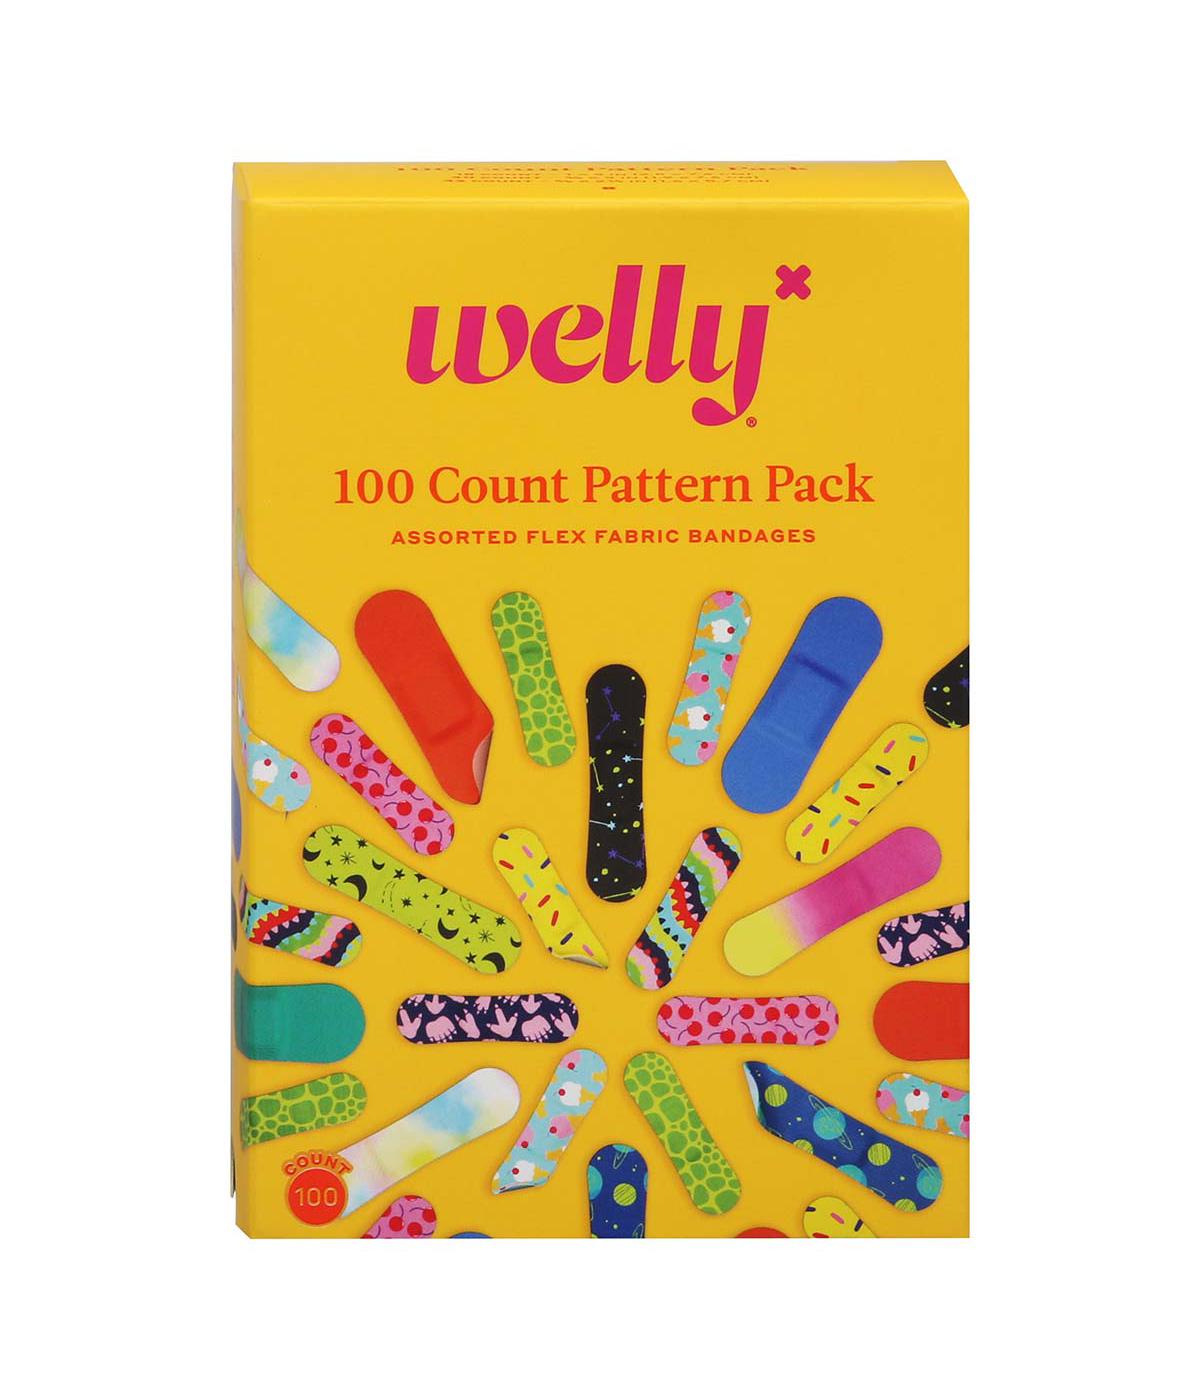 Welly Flex Fabric Pattern Pack Bandages - Assorted Sizes; image 1 of 3